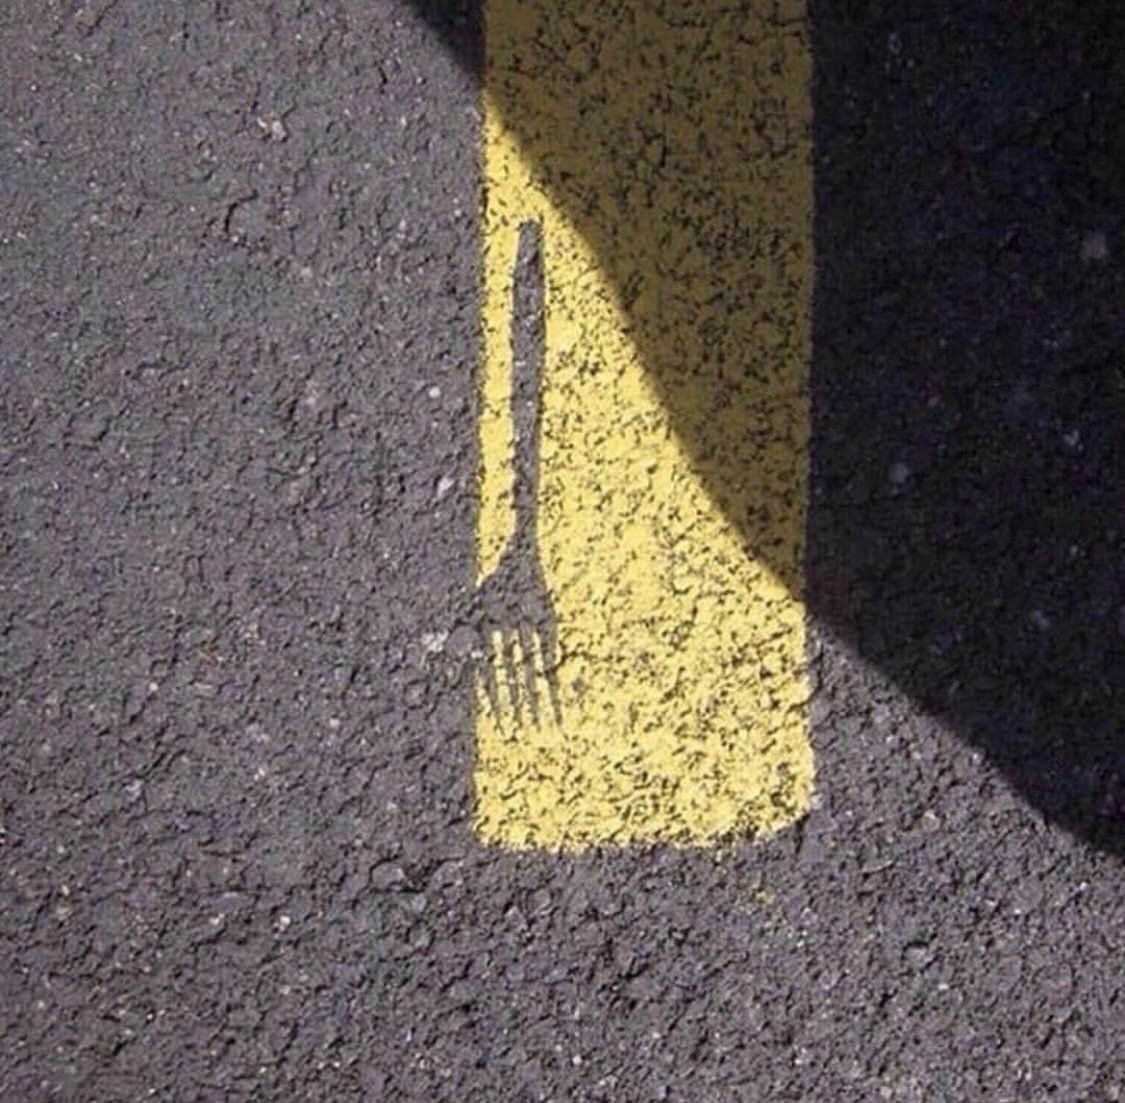 There's fork in the road